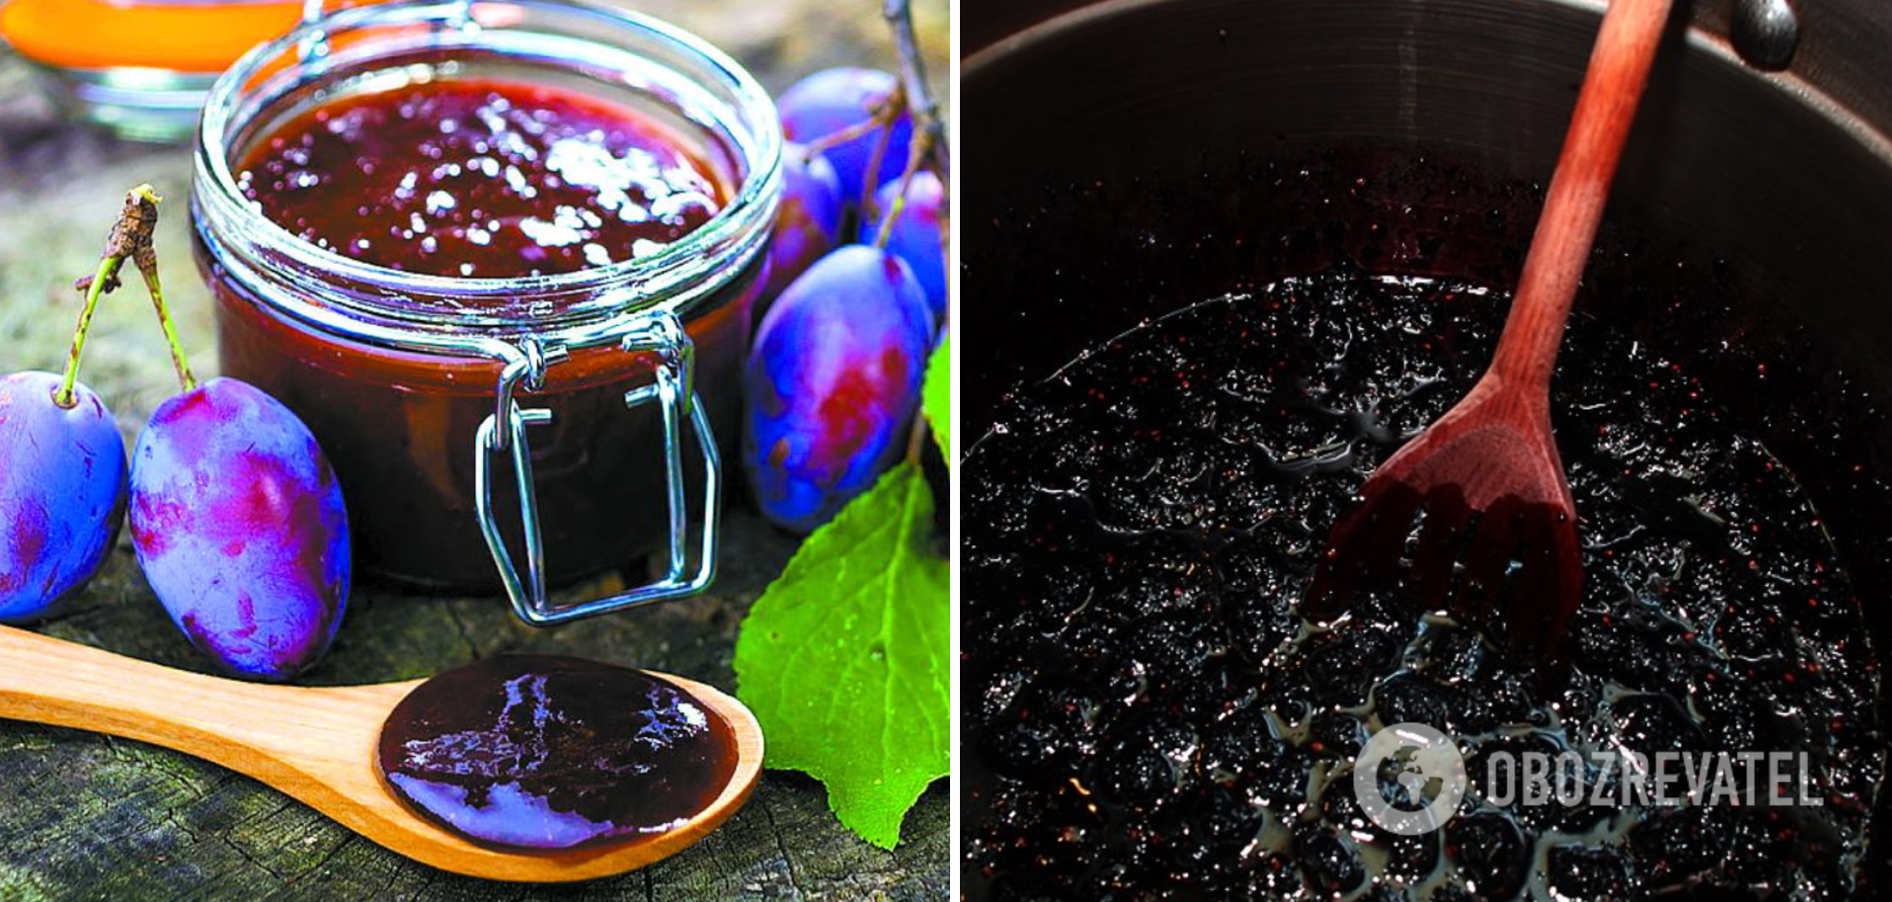 Why jam is made with a wooden spoon